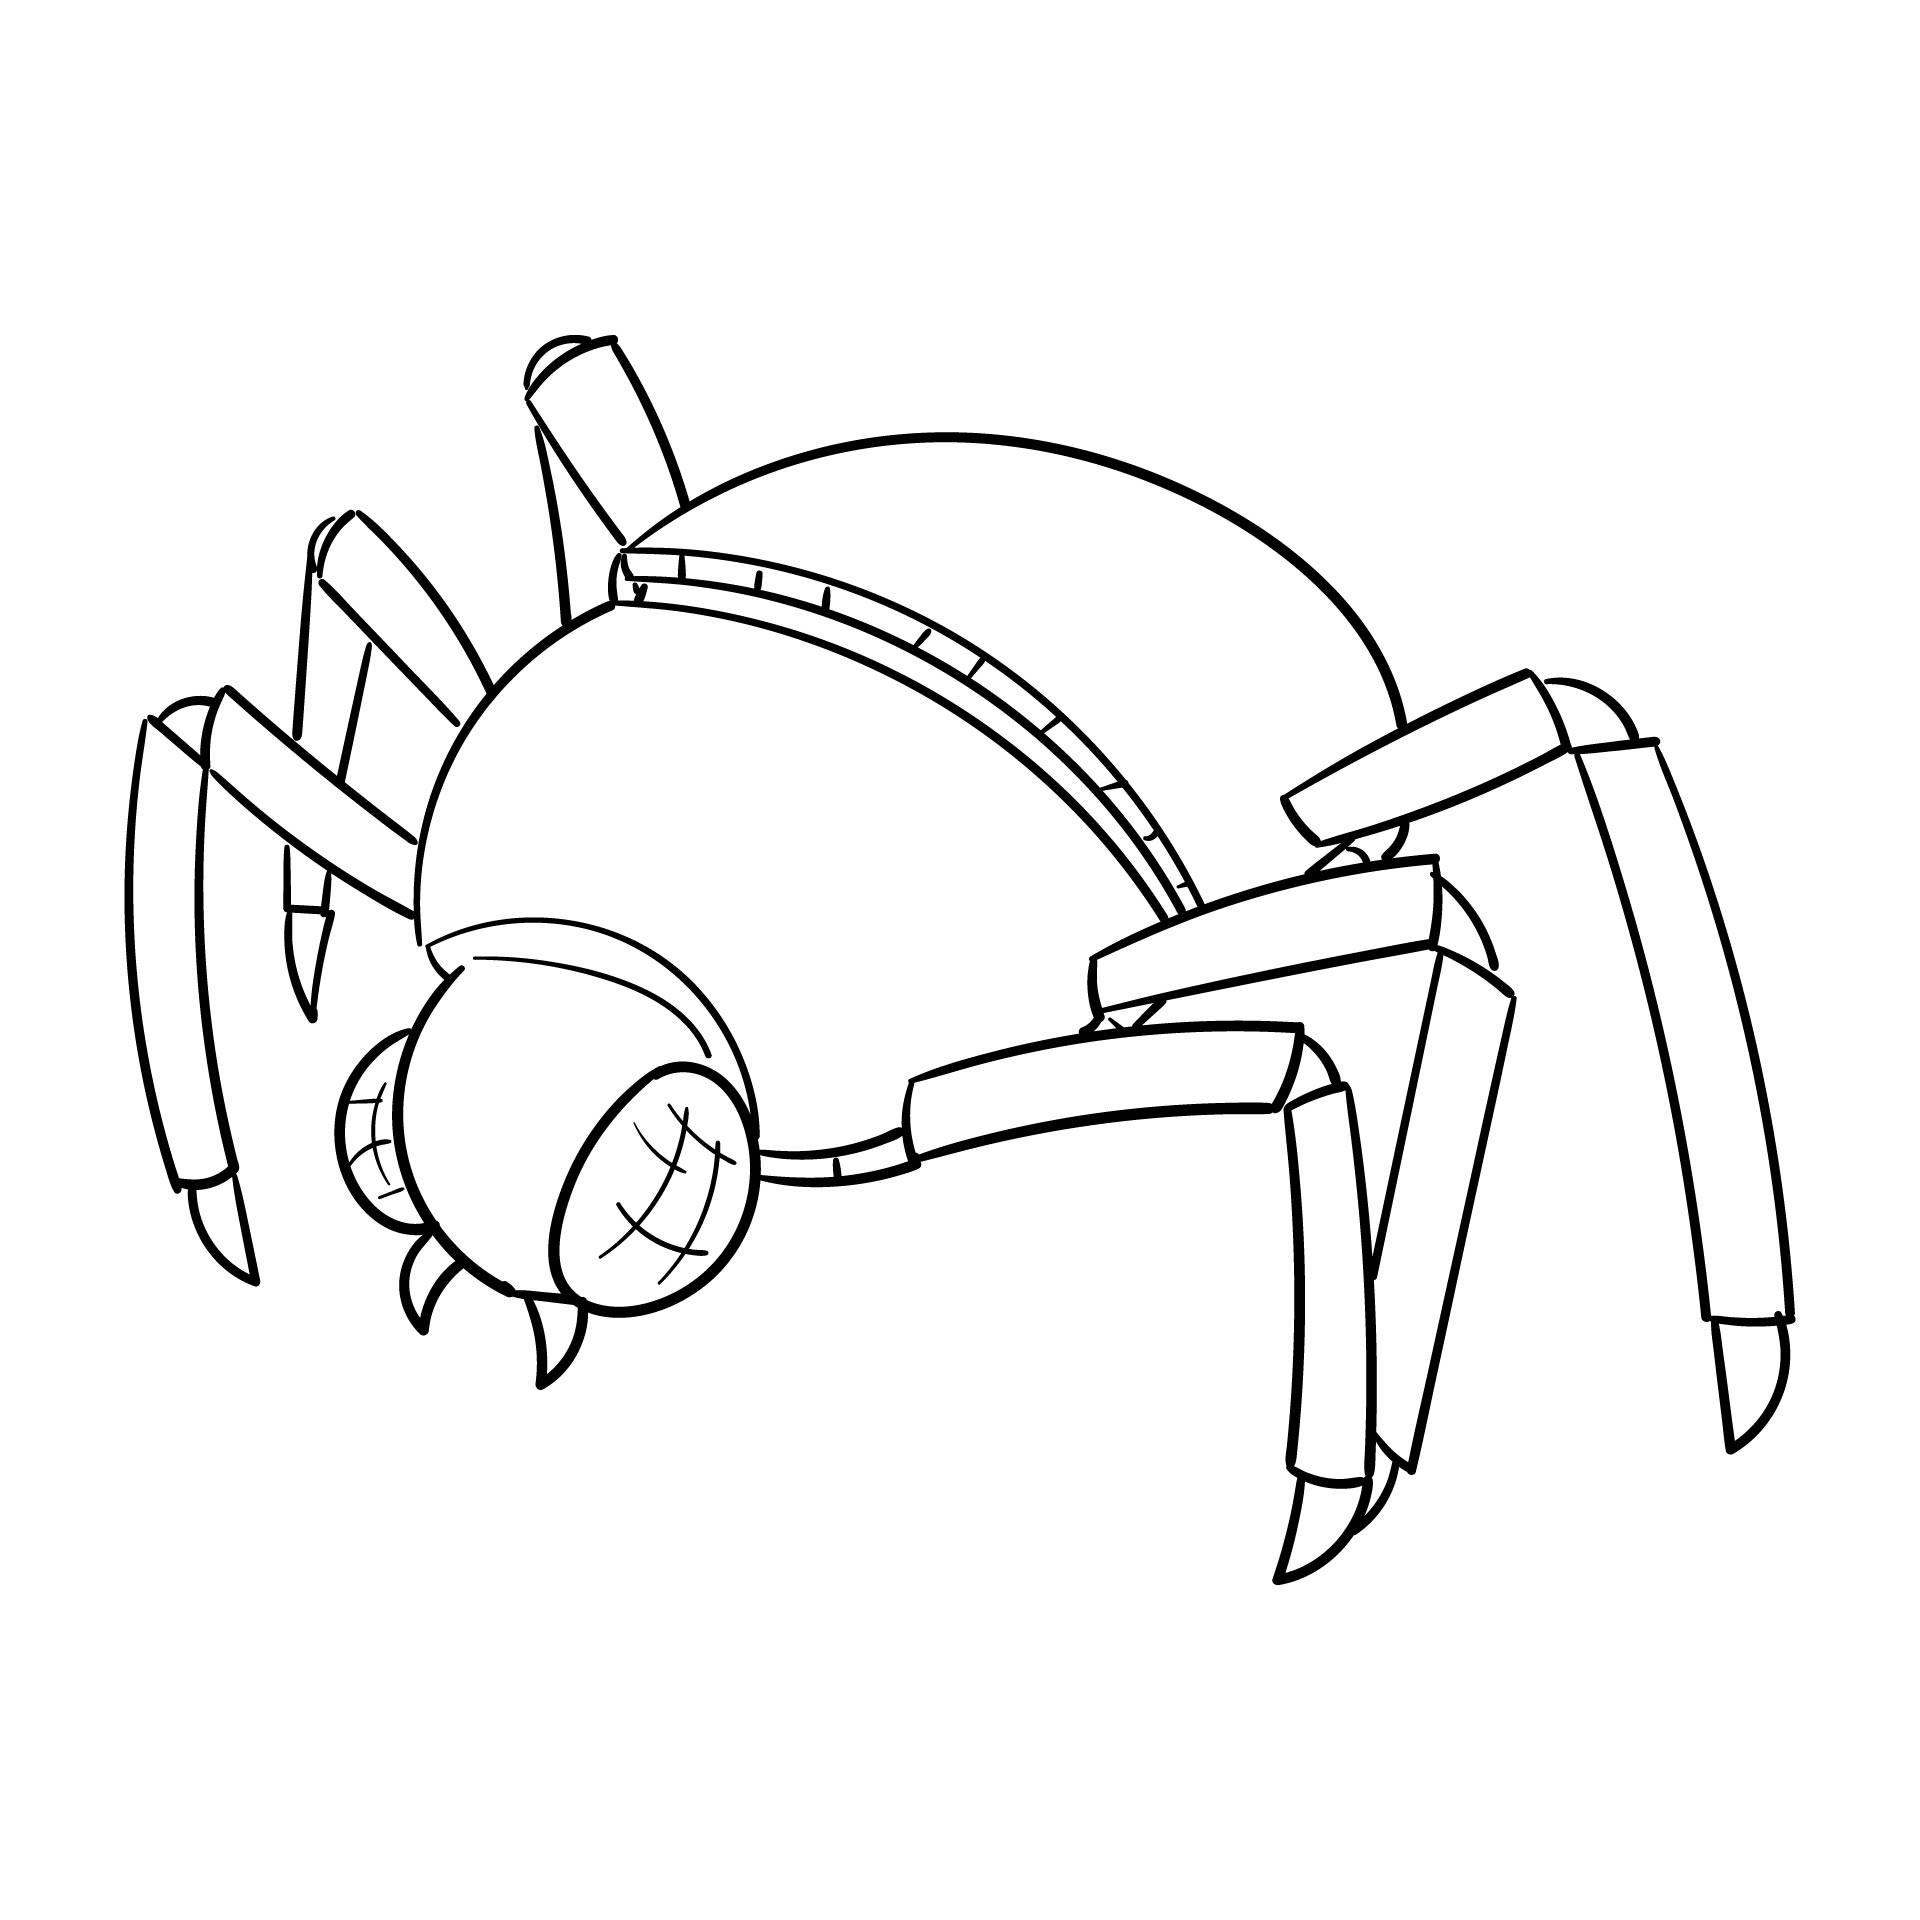 15 Best Free Printable Halloween Spider Coloring Pages PDF for Free at ...